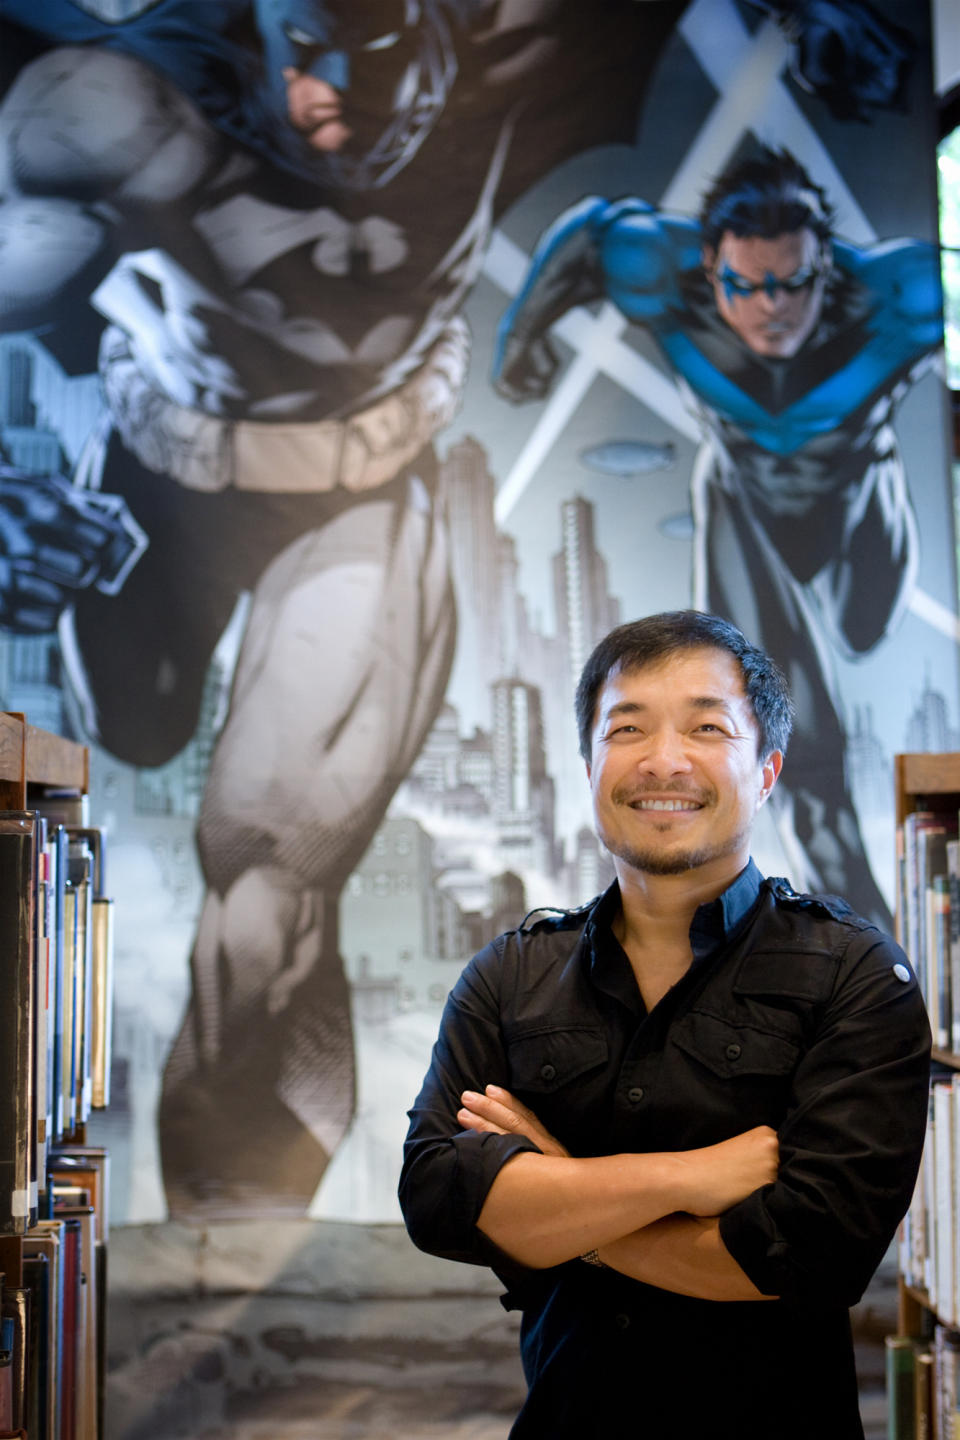 FILE - This file publicity mage released by DC Comics shows DC Comics' co-publisher Jim Lee. In September, DC Entertainment will publish a zero issue for its 52 titles, a move that co-publishers Lee and Dan DiDio said this week will help explain the origins and effects of its rebooted characters a year after it erased decades of history and continuity to start everything from scratch. (AP Photo/DC Comics, Victor Ha, File)